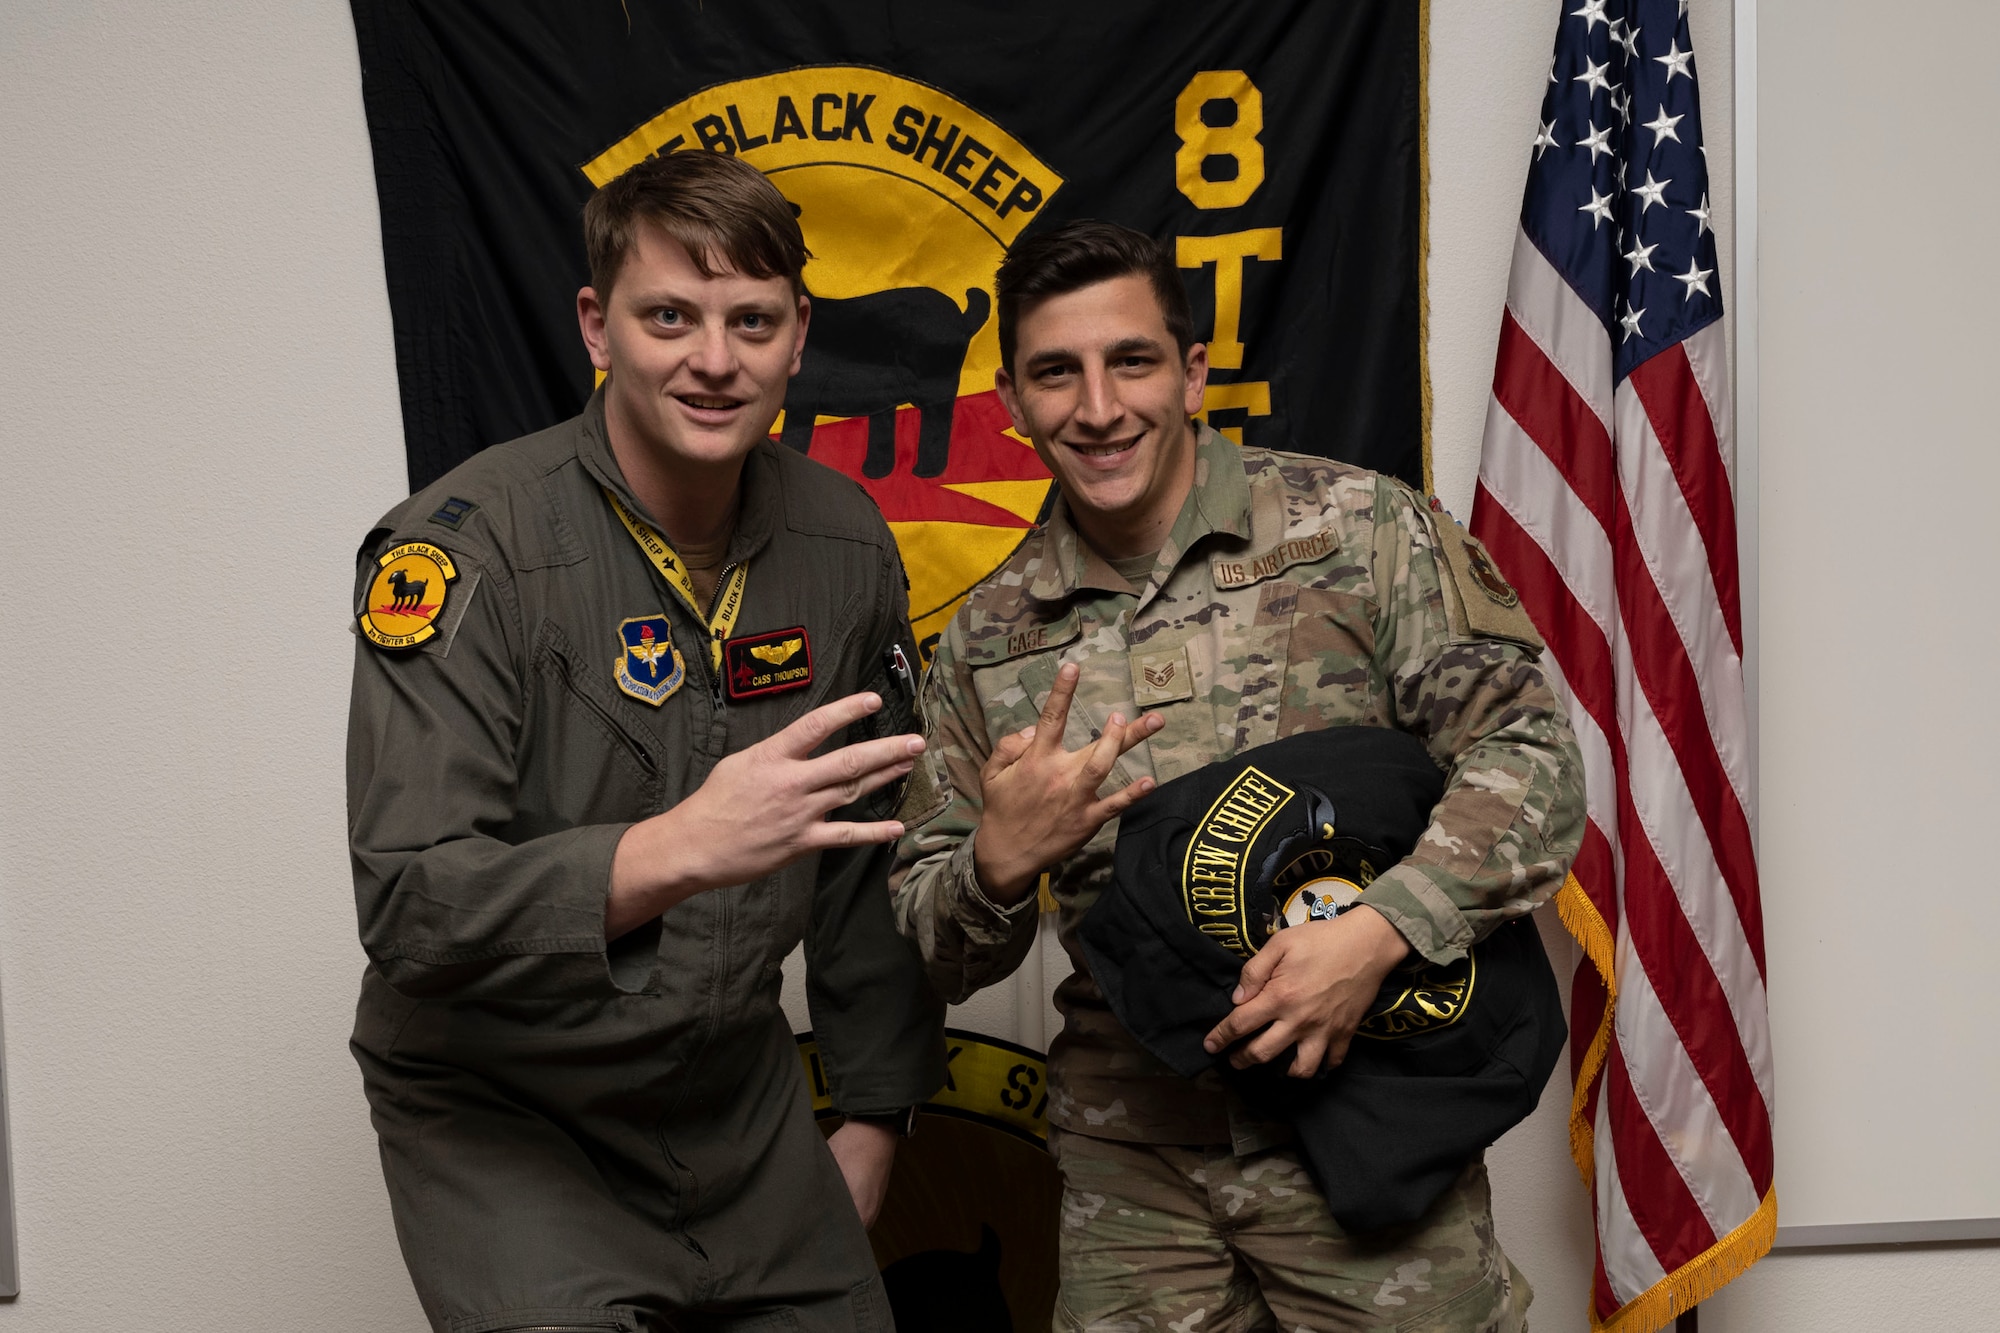 U.S. Air Force Staff Sgt. Timothy Case, 8th Aircraft Maintenance Unit crew chief, right, poses for a photo with U.S. Air Force Capt. Daniel Thompson, 8th Fighter Squadron pilot, during a Dedicated Crew Chief Appointment ceremony at Holloman Air Force Base, New Mexico, Jan. 3, 2022. To receive the title of DCC, a crew chief must demonstrate a history of superior performance in their career, comply with all safety practices and complete all required training. (U.S. Air Force photo by Senior Airman Antonio Salfran)